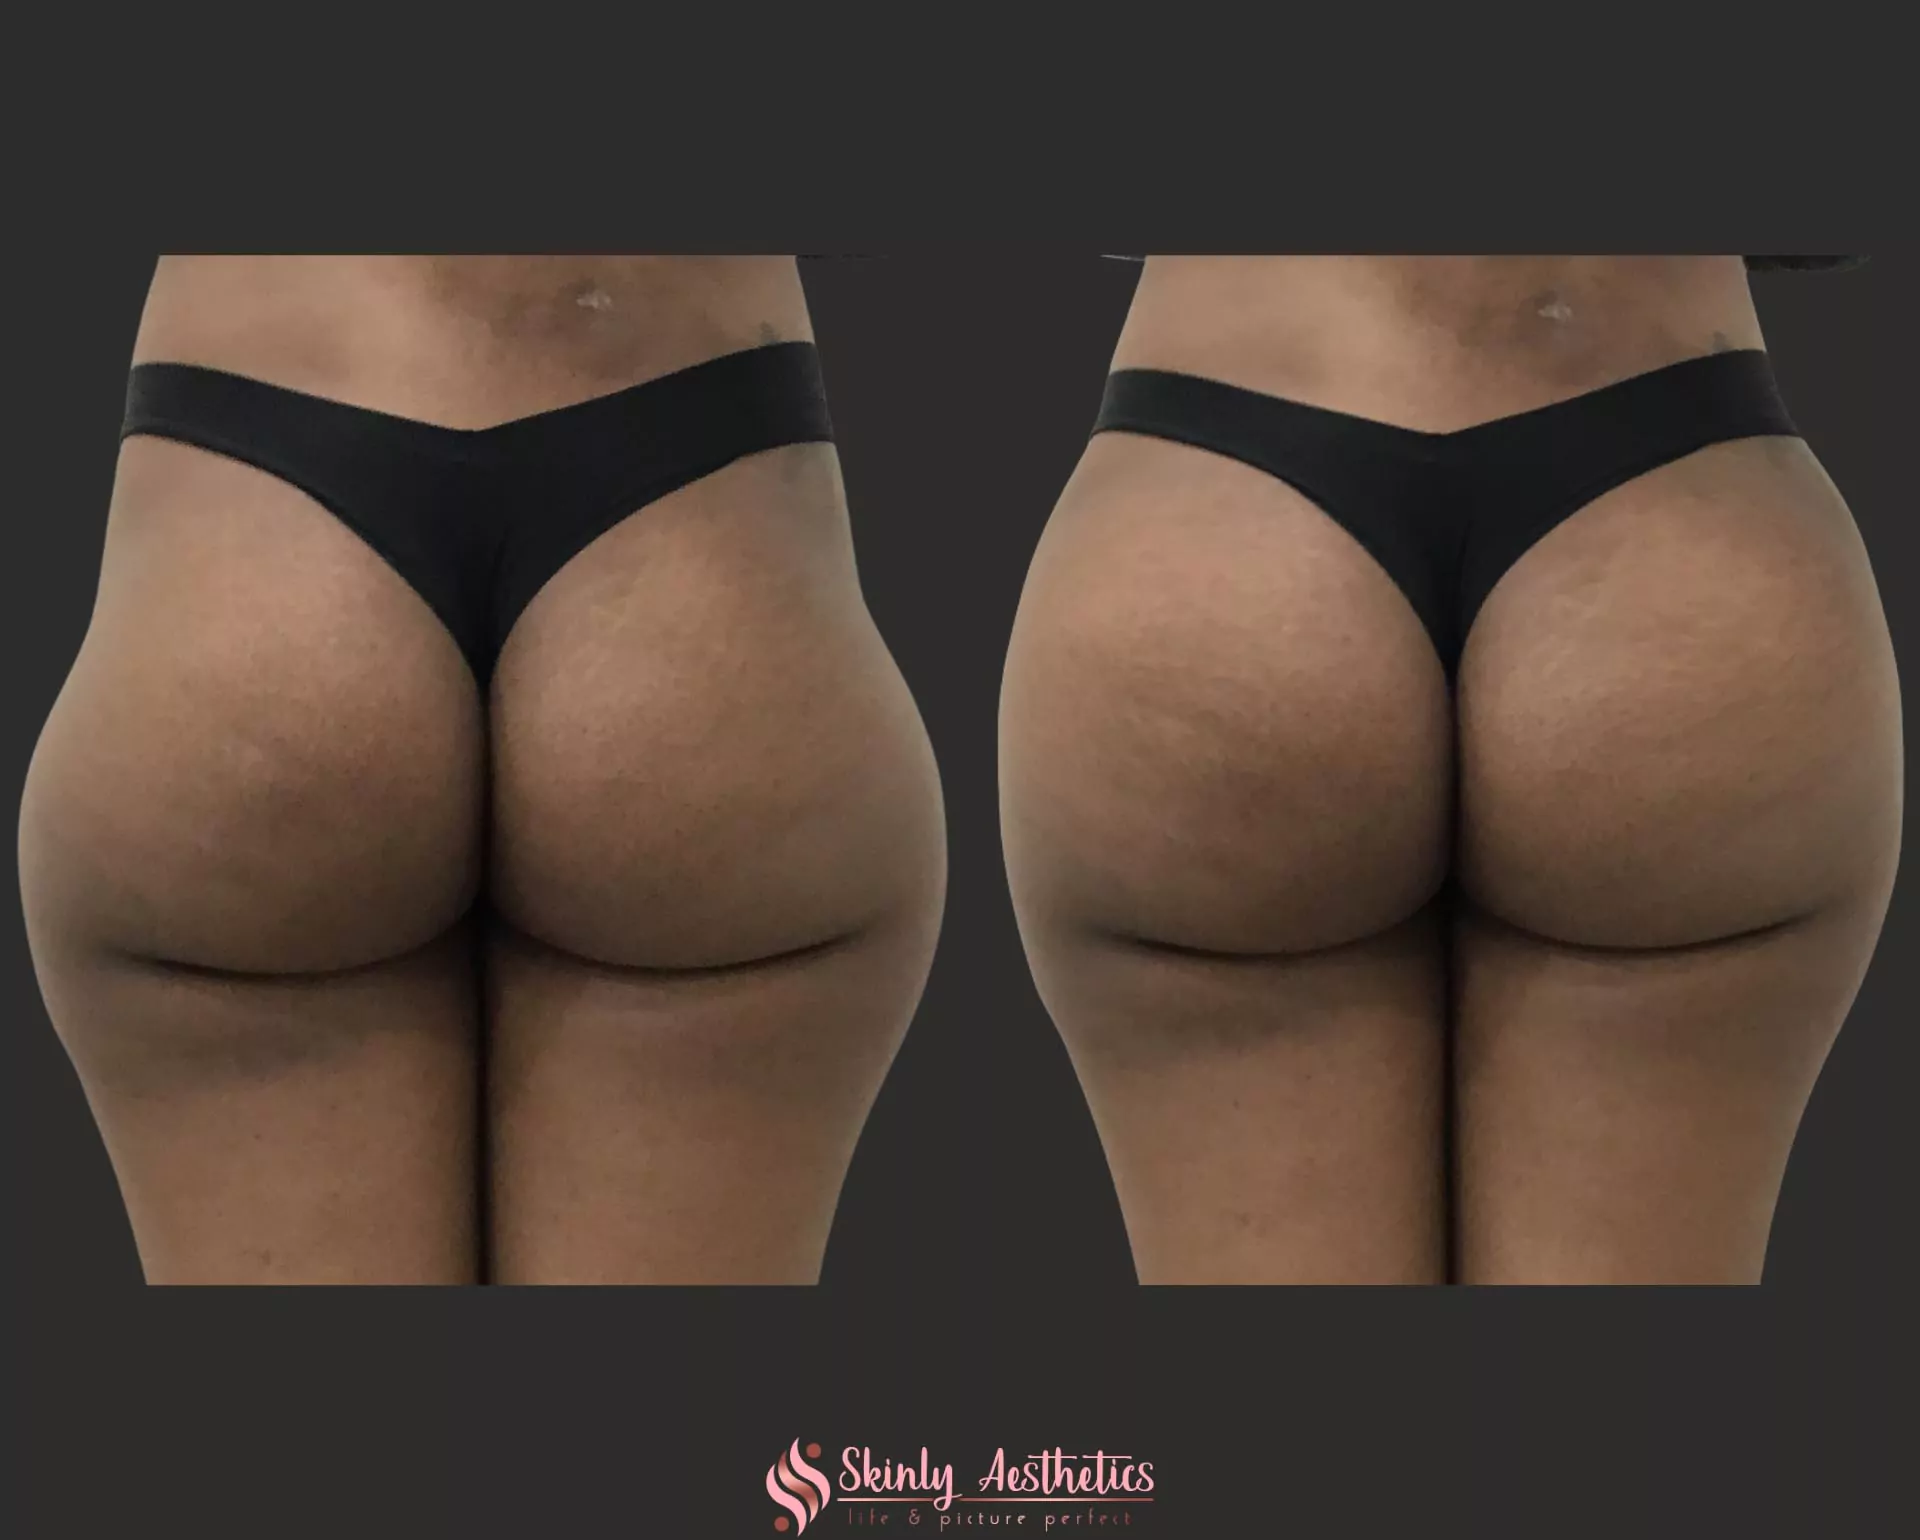 severe hip dip deformities corrected with Sculptra and Radiesse fillers